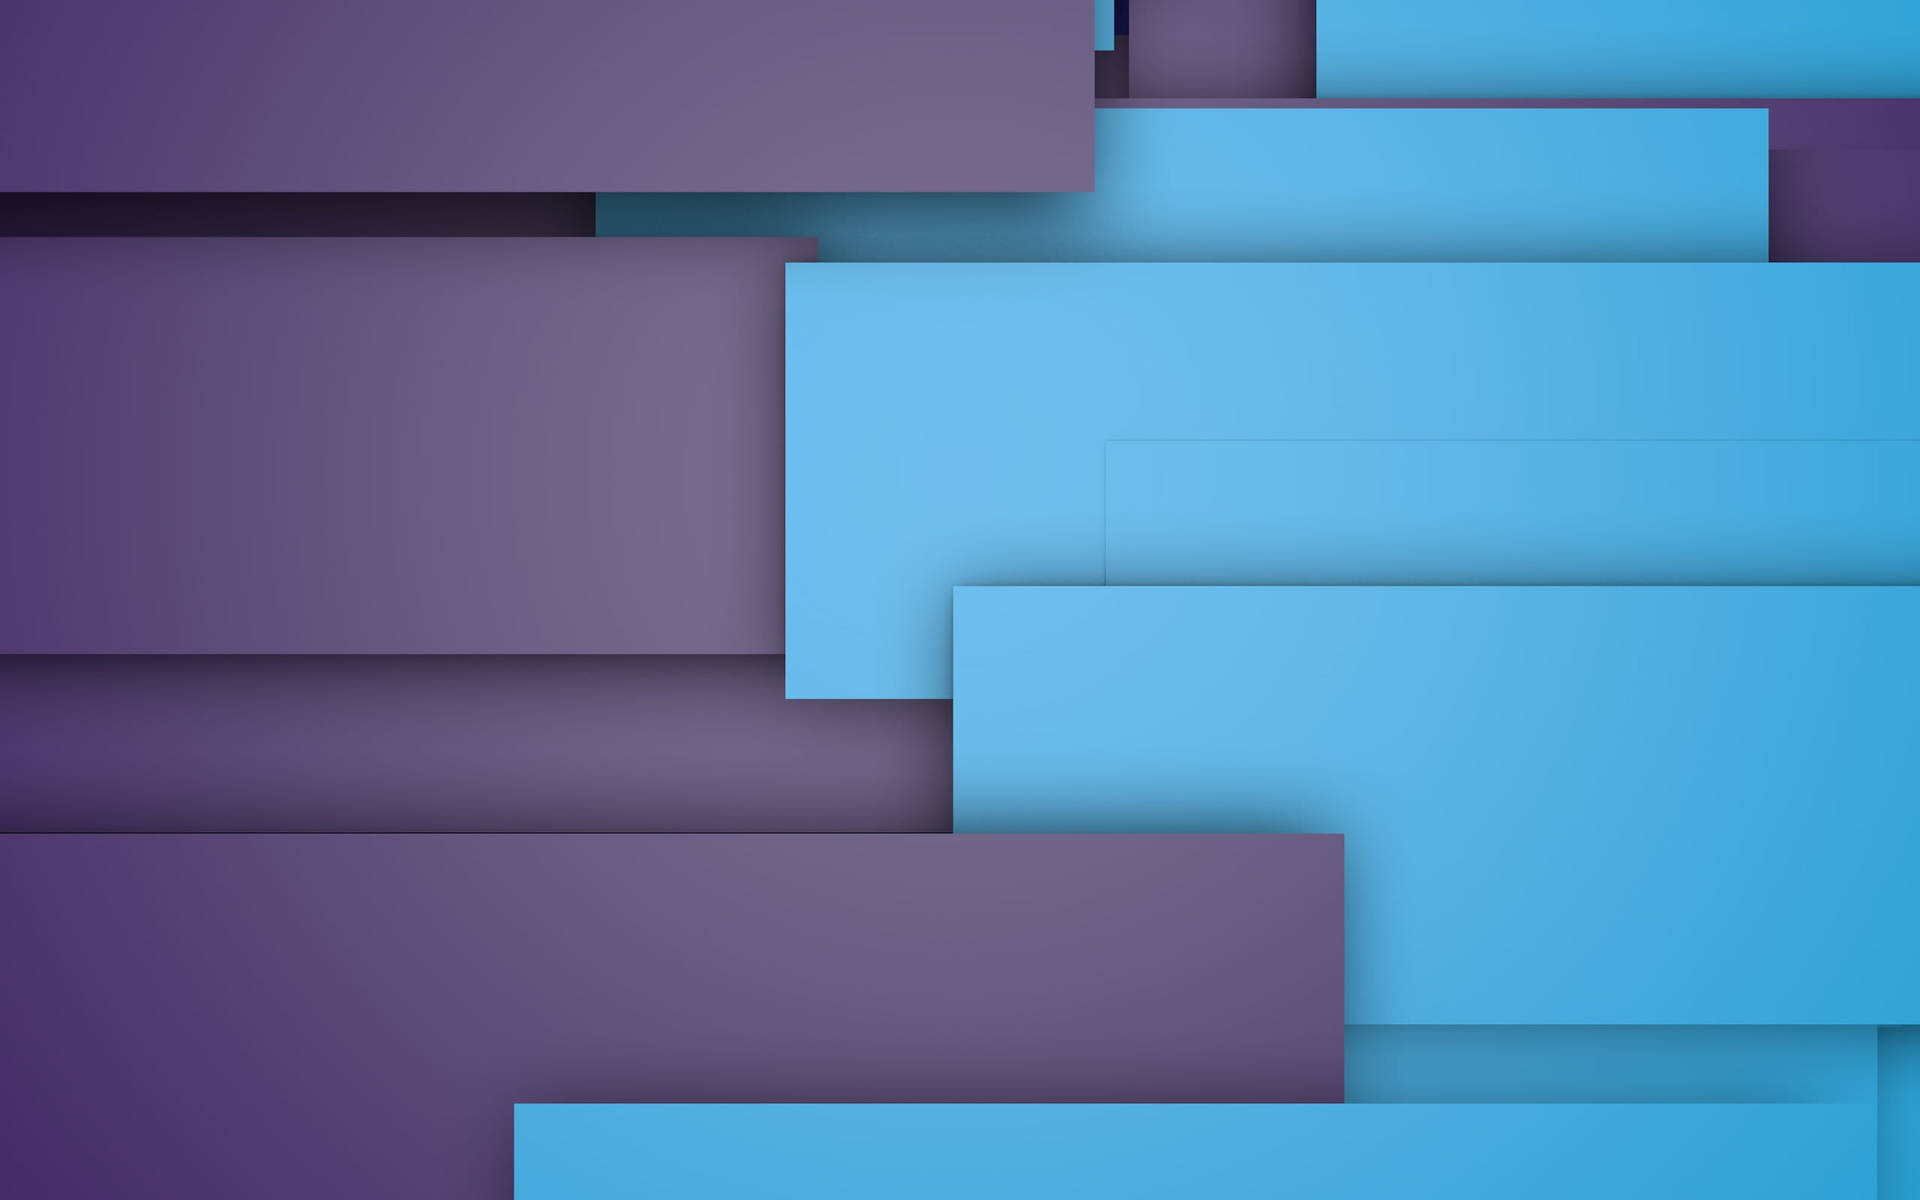 Blue And Purple Rectangles Material Design Wallpaper